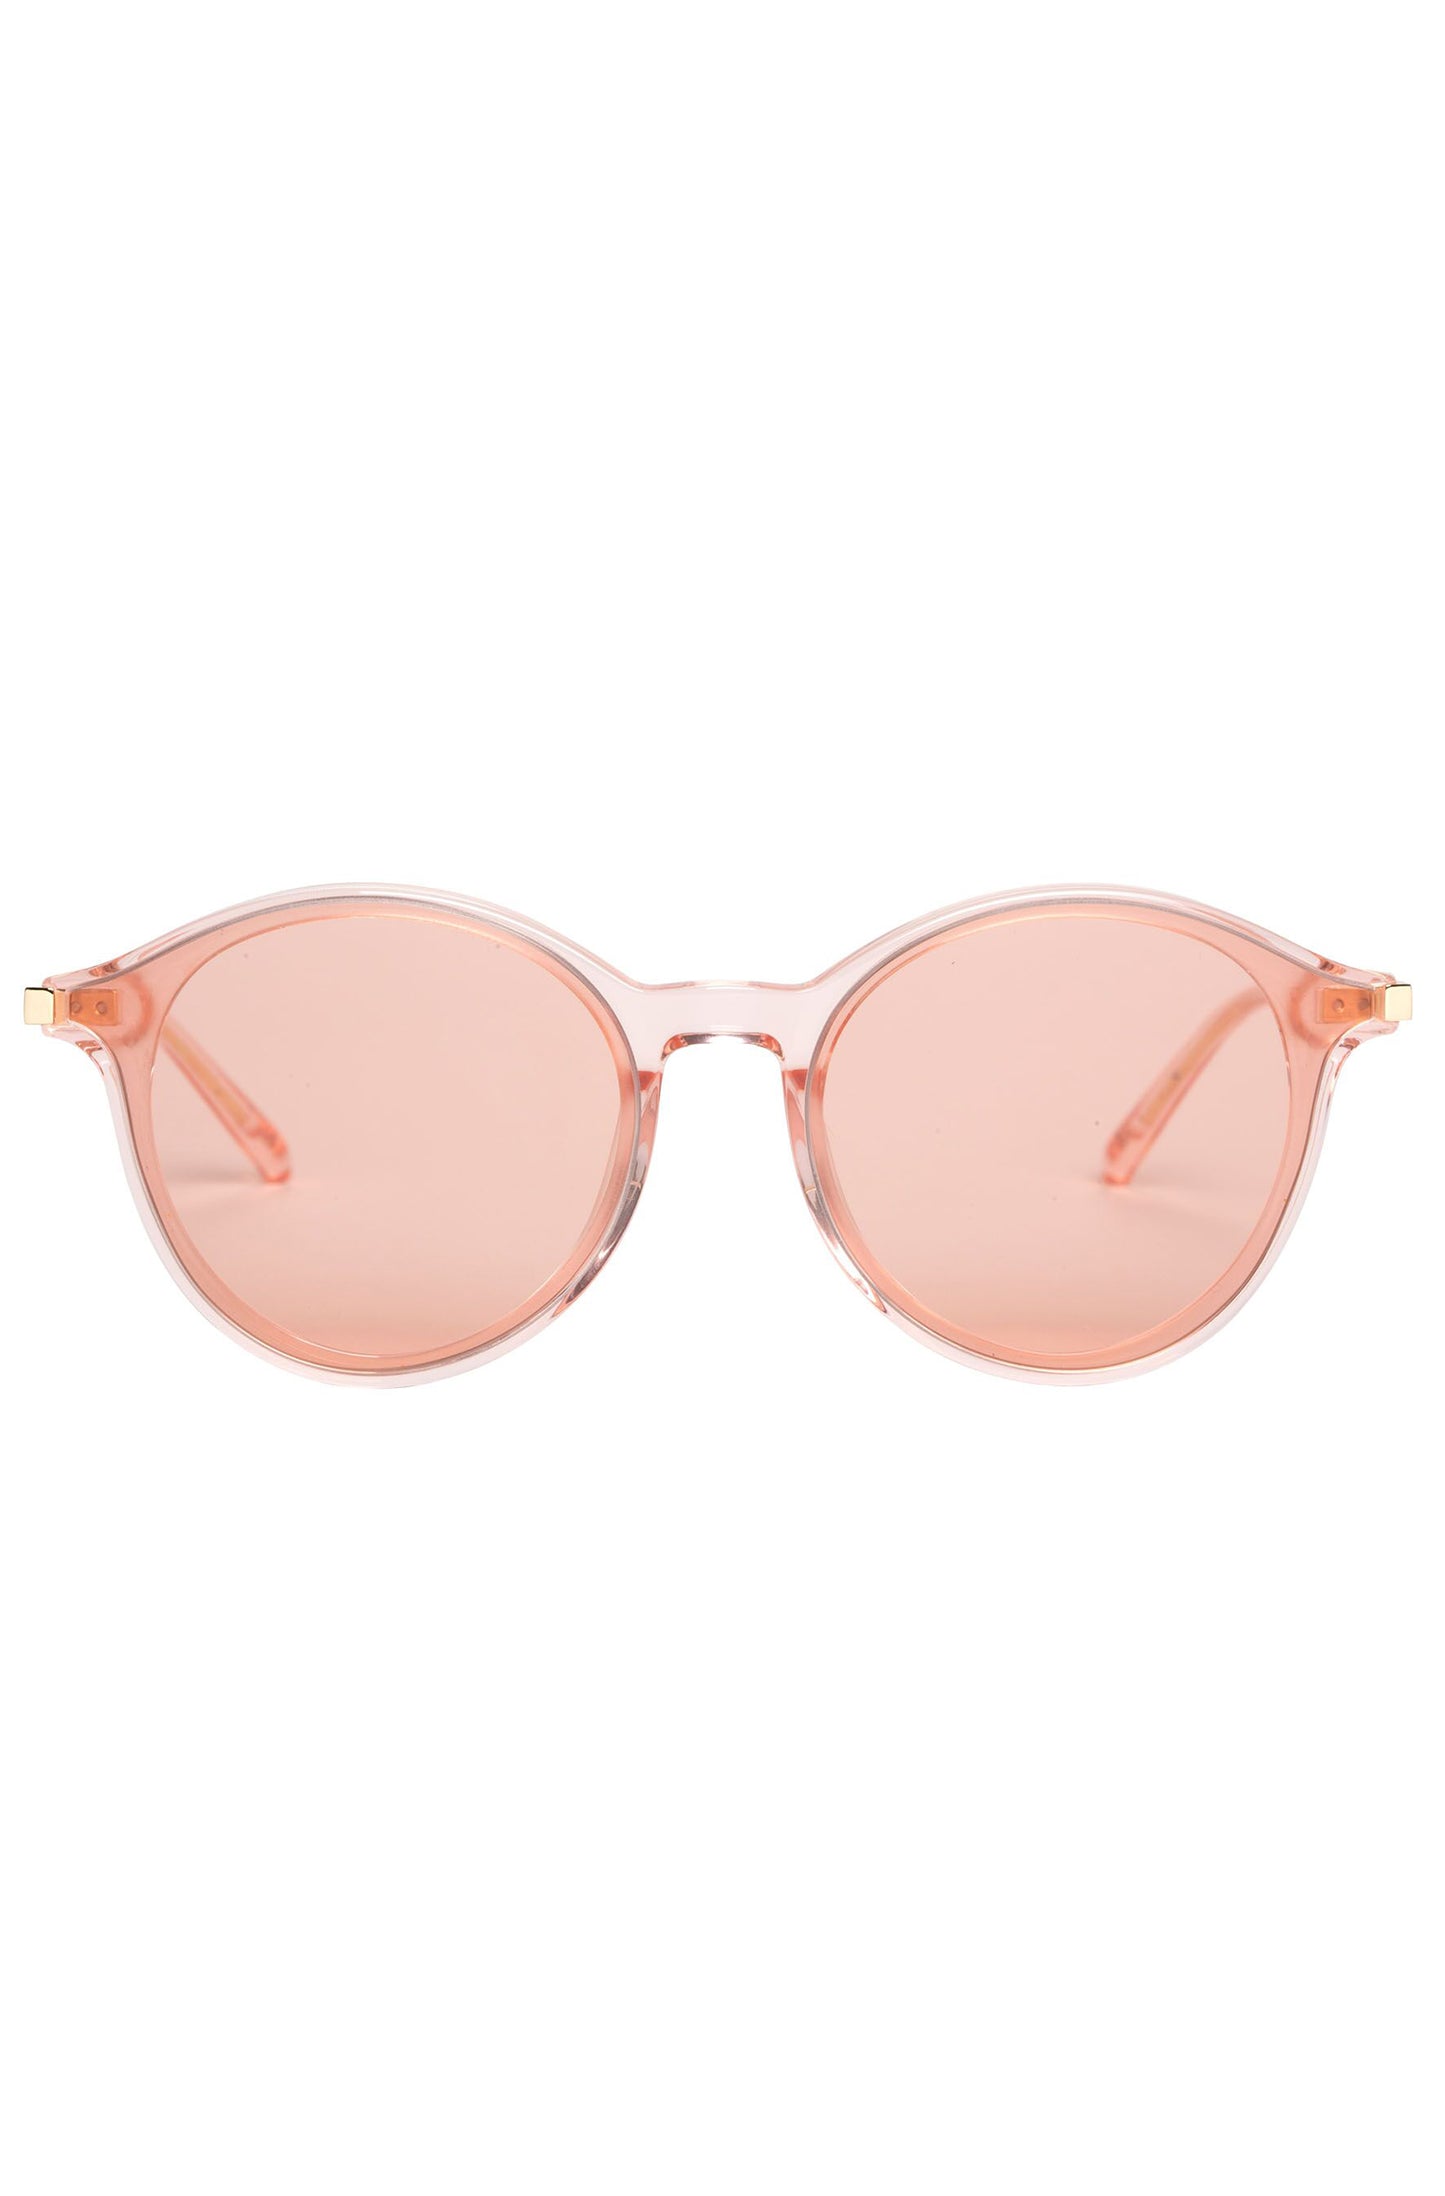 A pair of Bonnie Clyde pink frames on a white background.-1168841048145